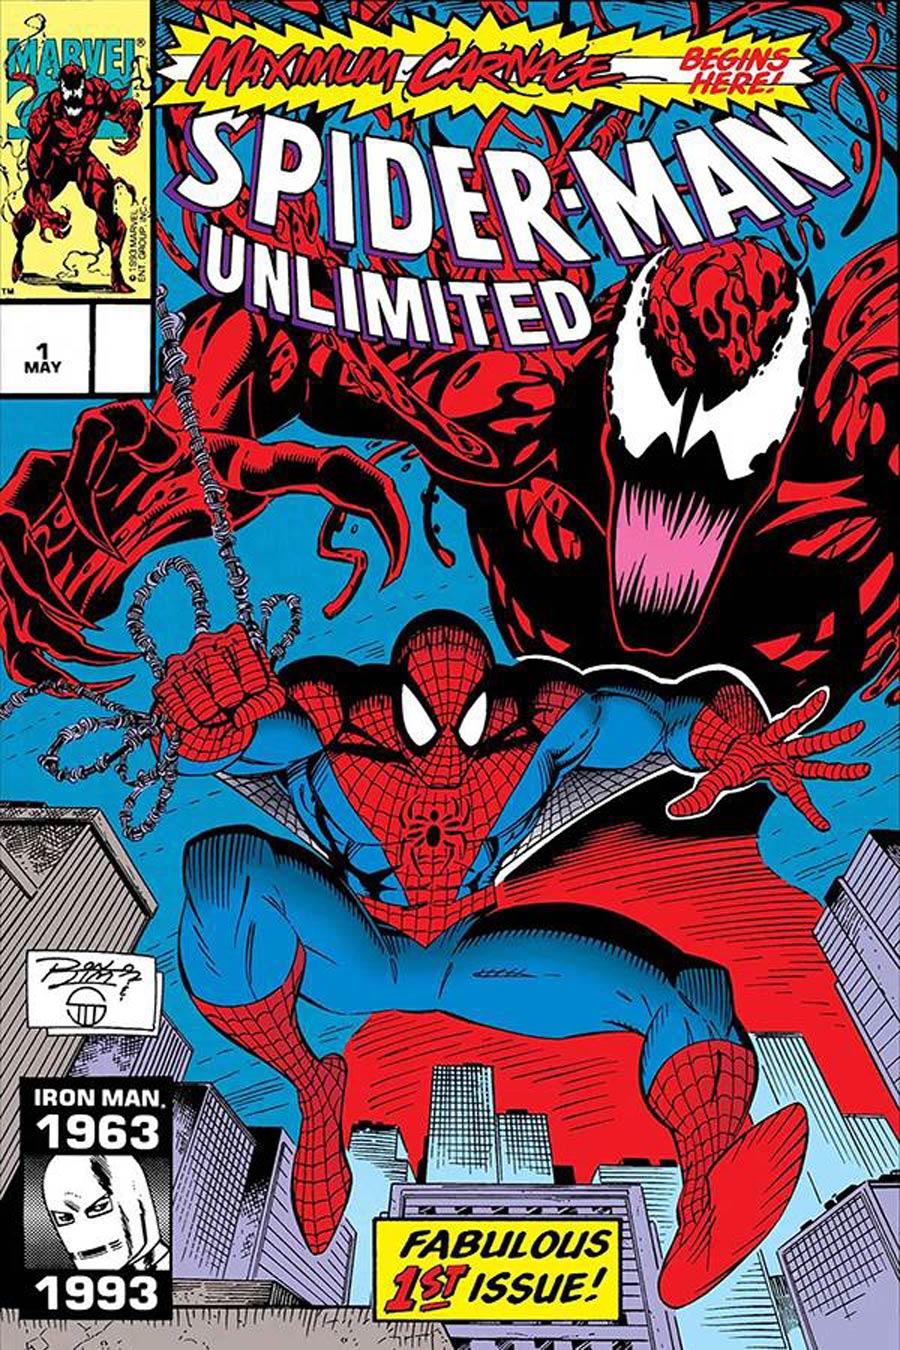 True Believers Absolute Carnage Maximum Carnage #1 Cover B DF Signed By Ron Lim